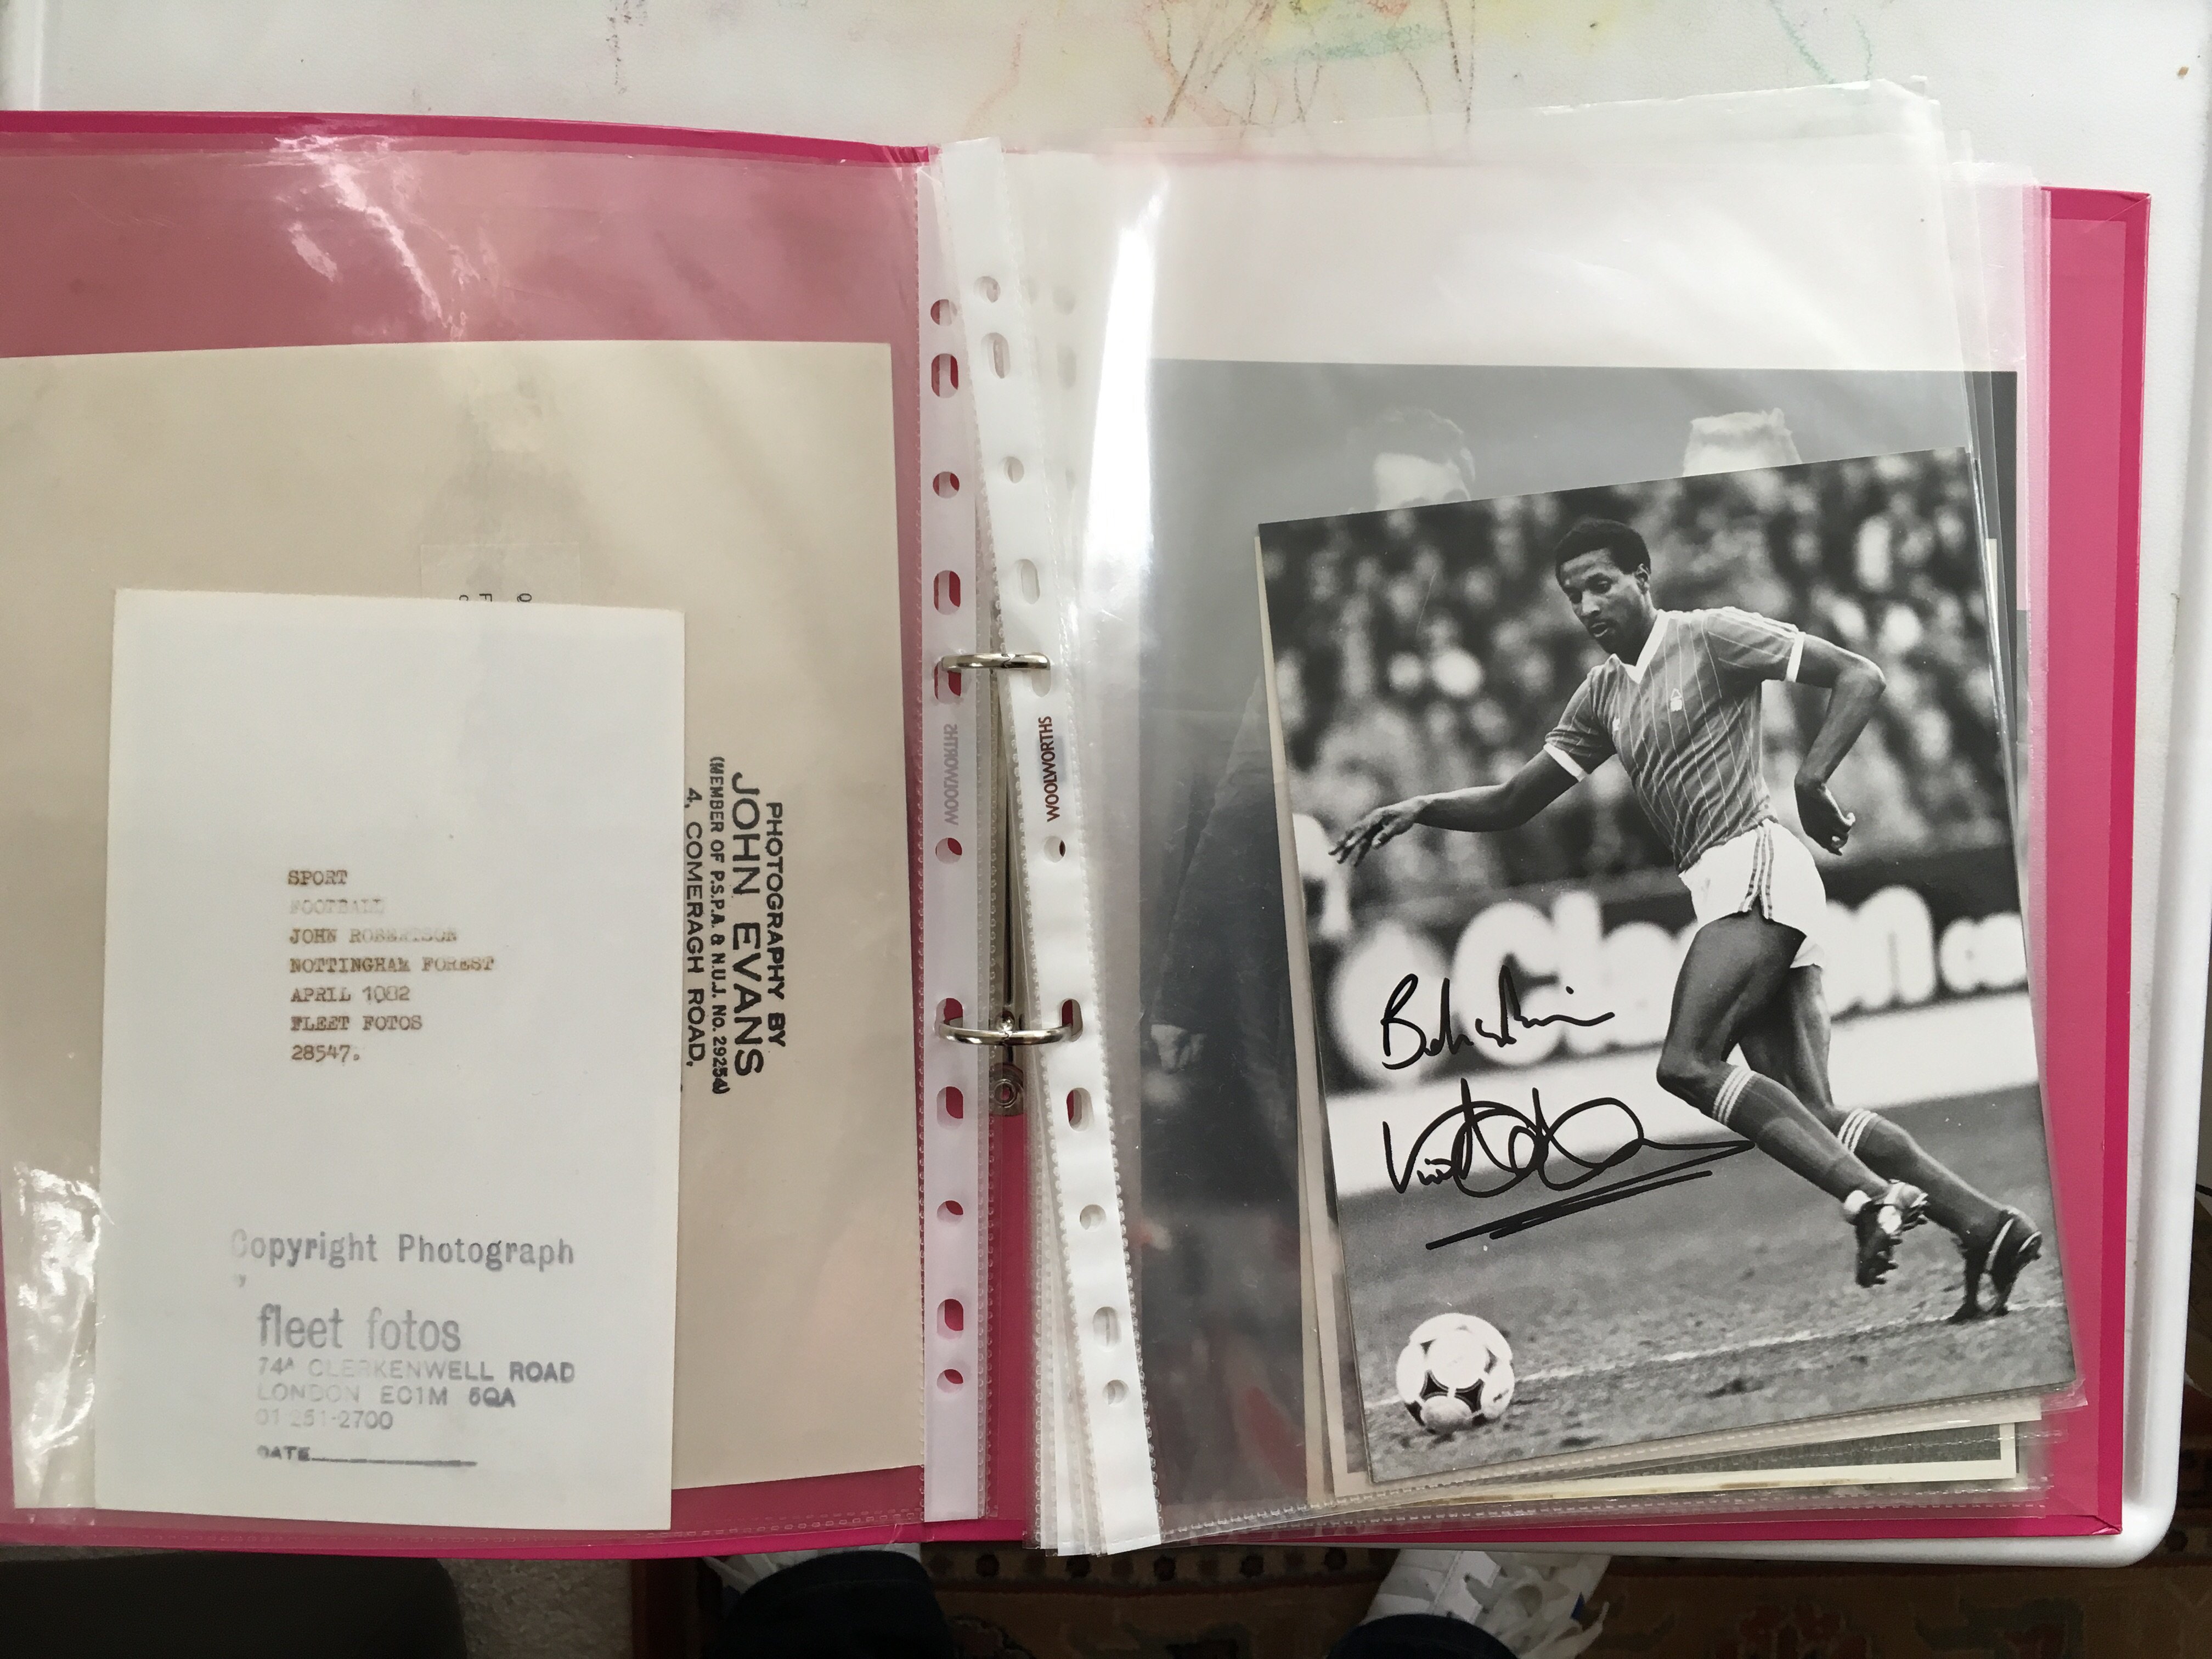 Nottingham Forest Signed Football Press Photos: Black and white from the early 80s including - Image 2 of 2